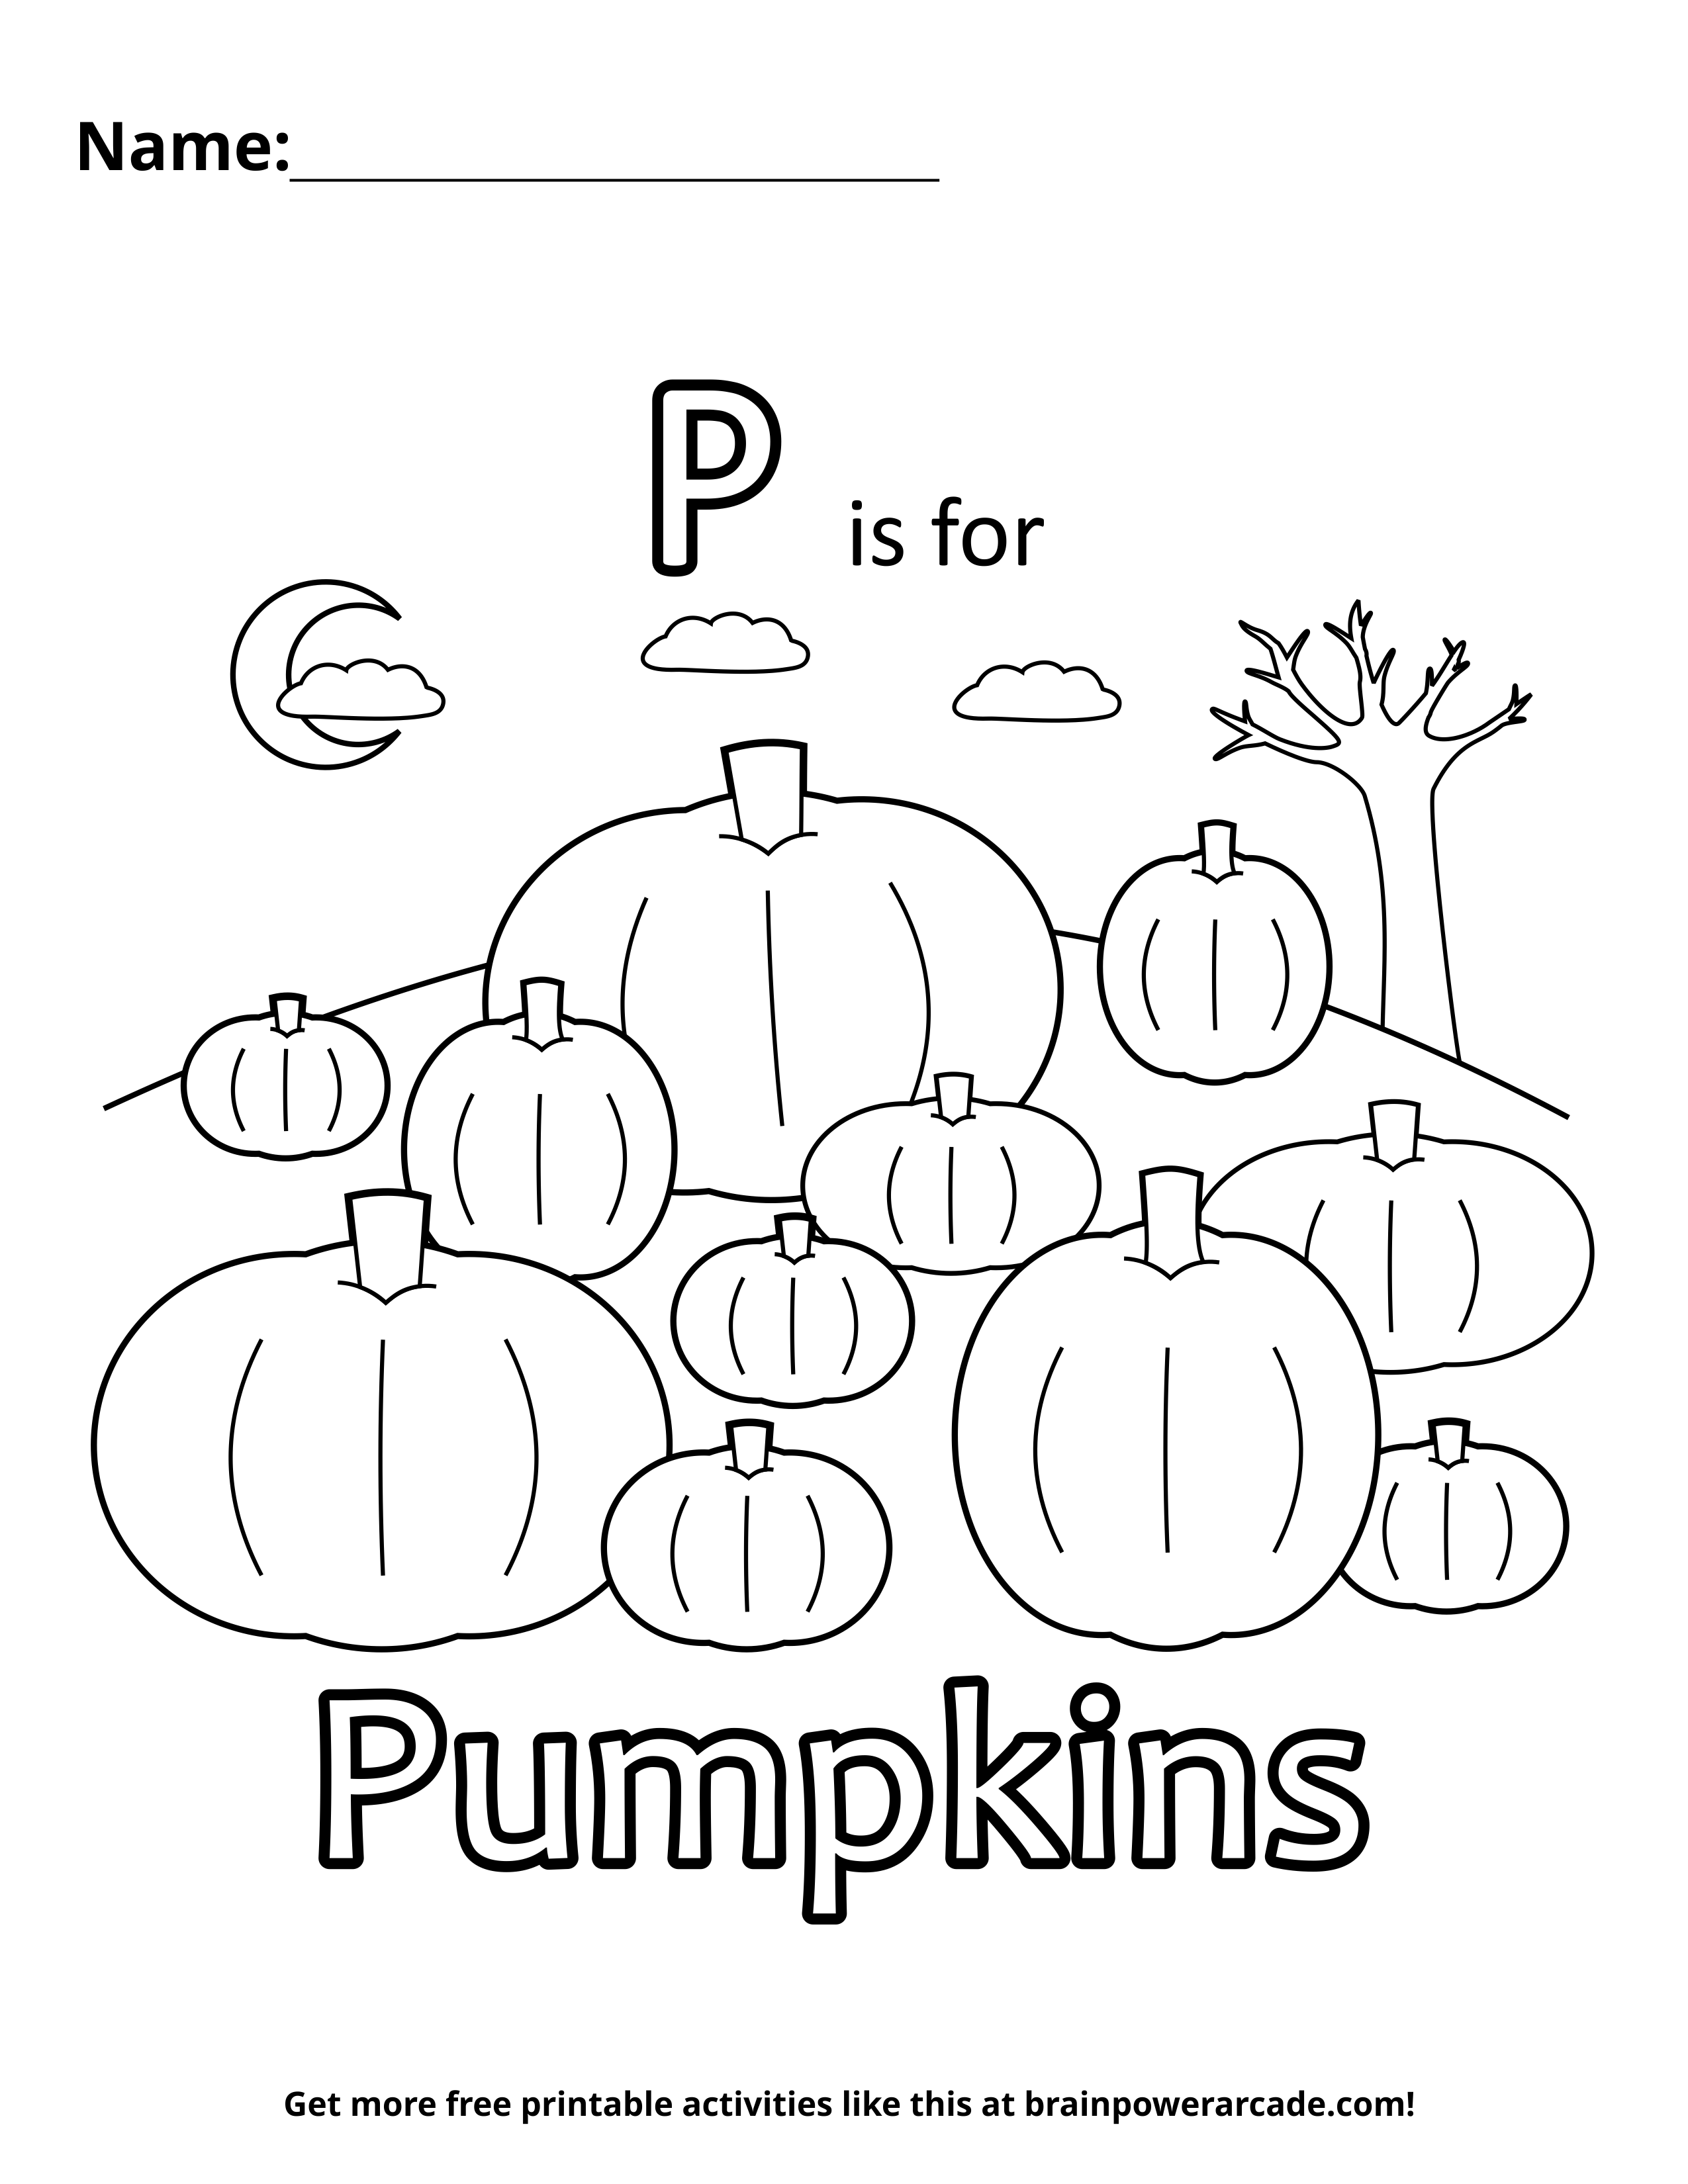 P is for Pumpkins Coloring Page